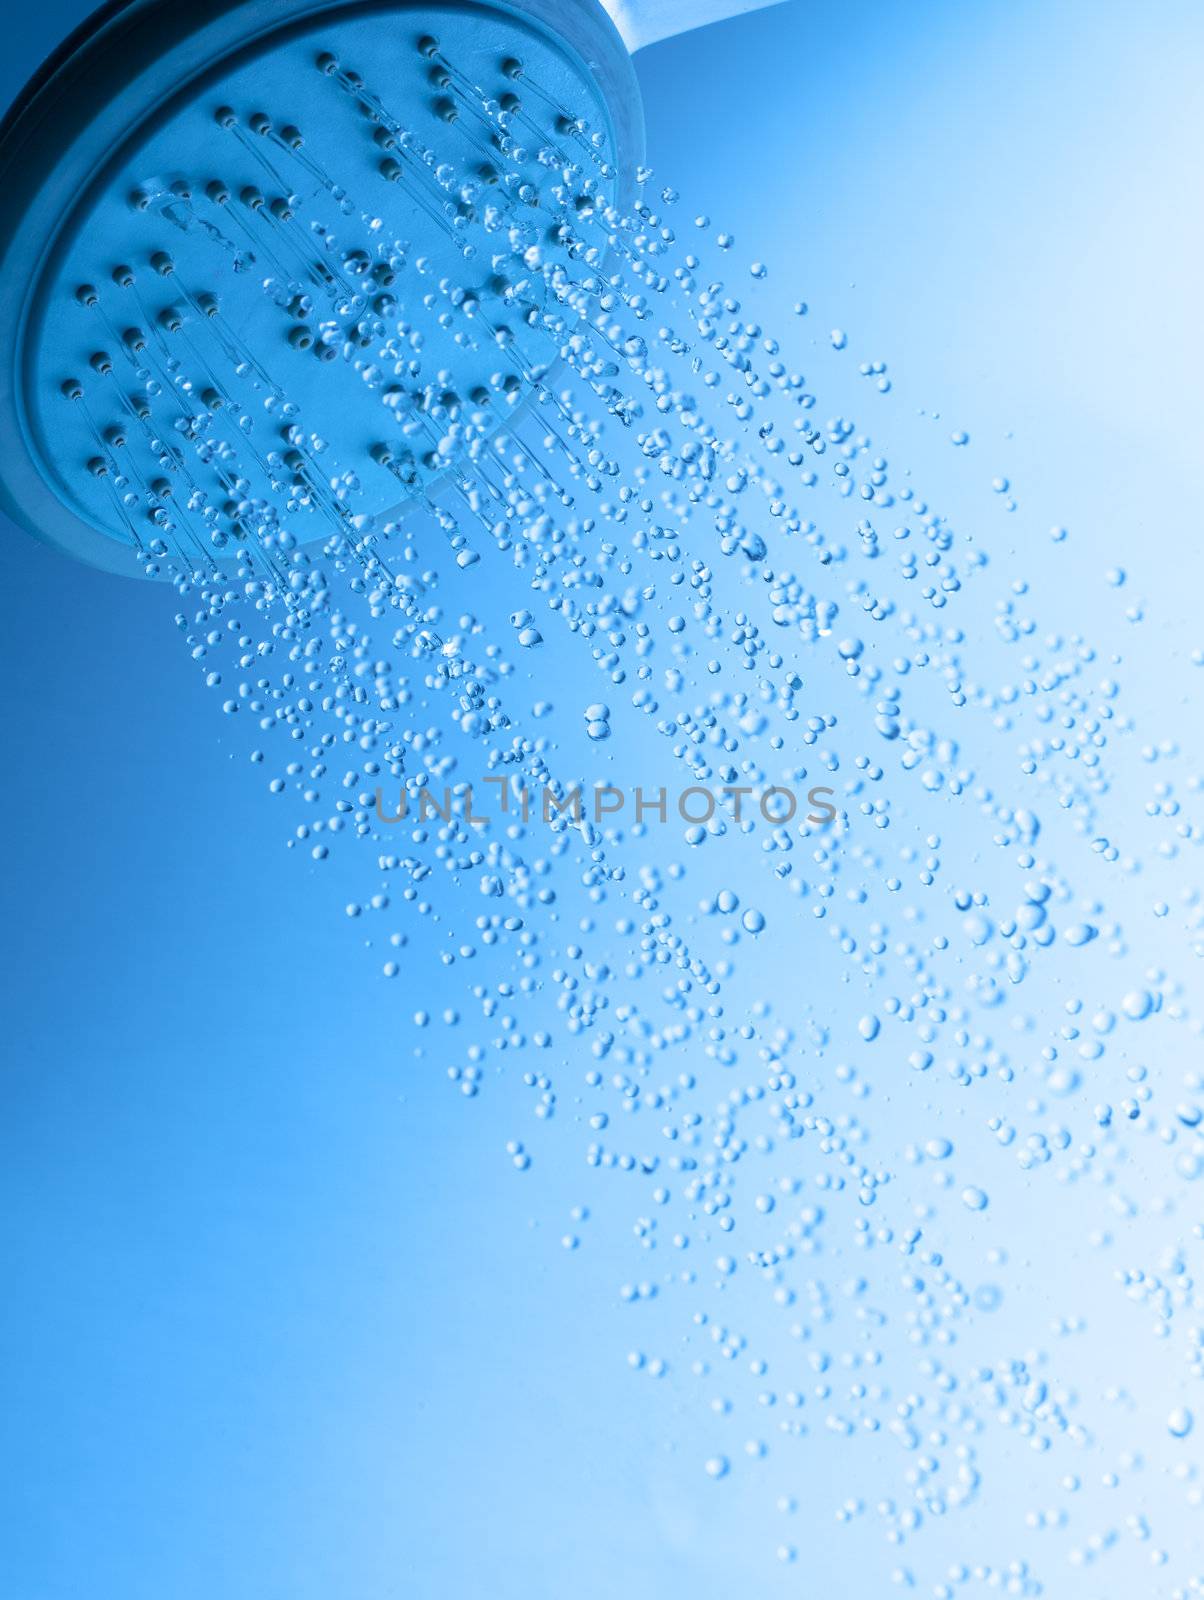 Shower Head with Running Water by Discovod